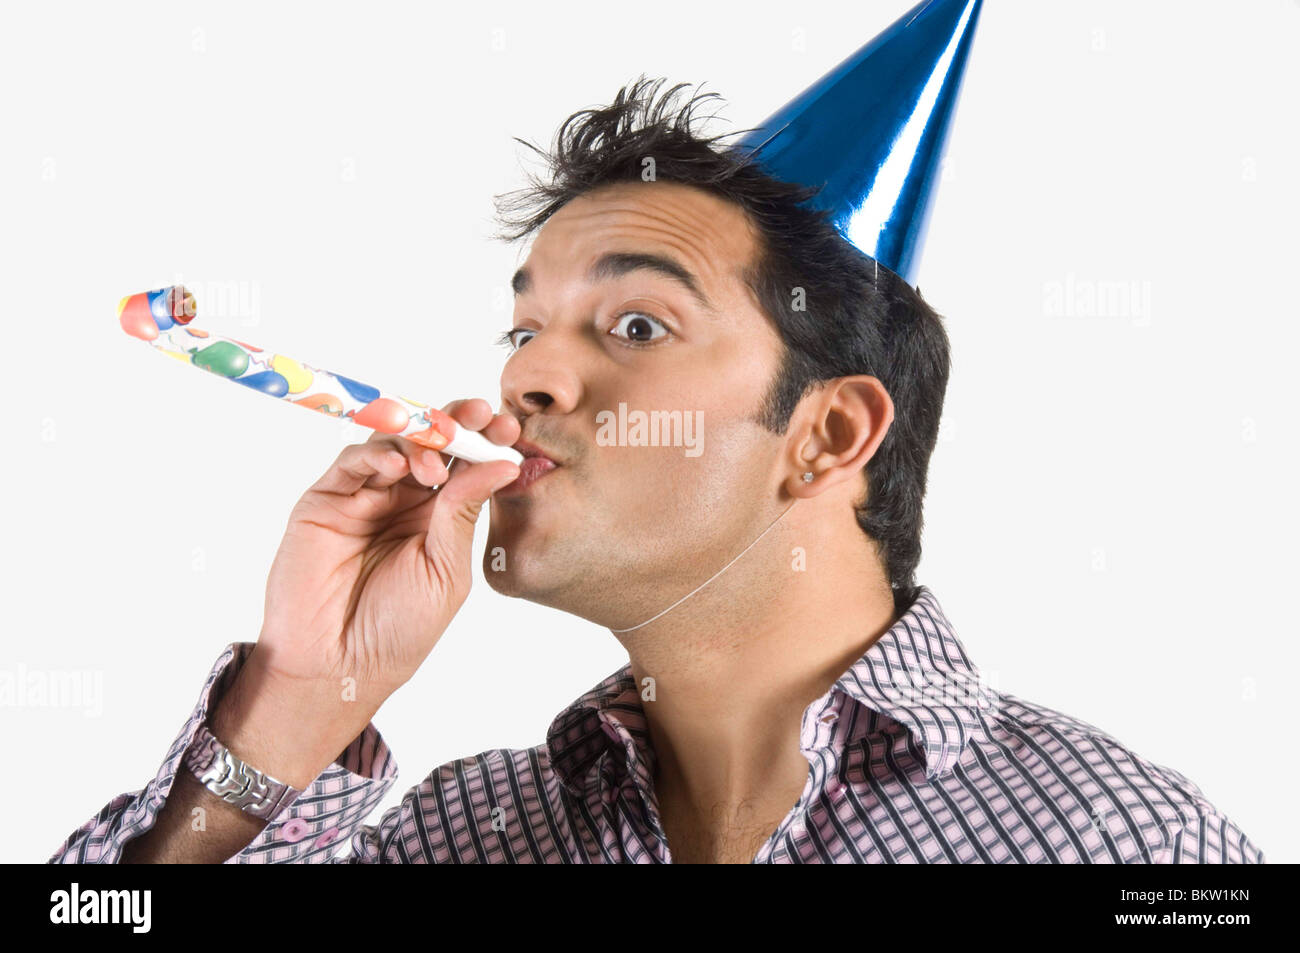 young-man-blowing-party-horn-blower-close-up-BKW1KN.jpg